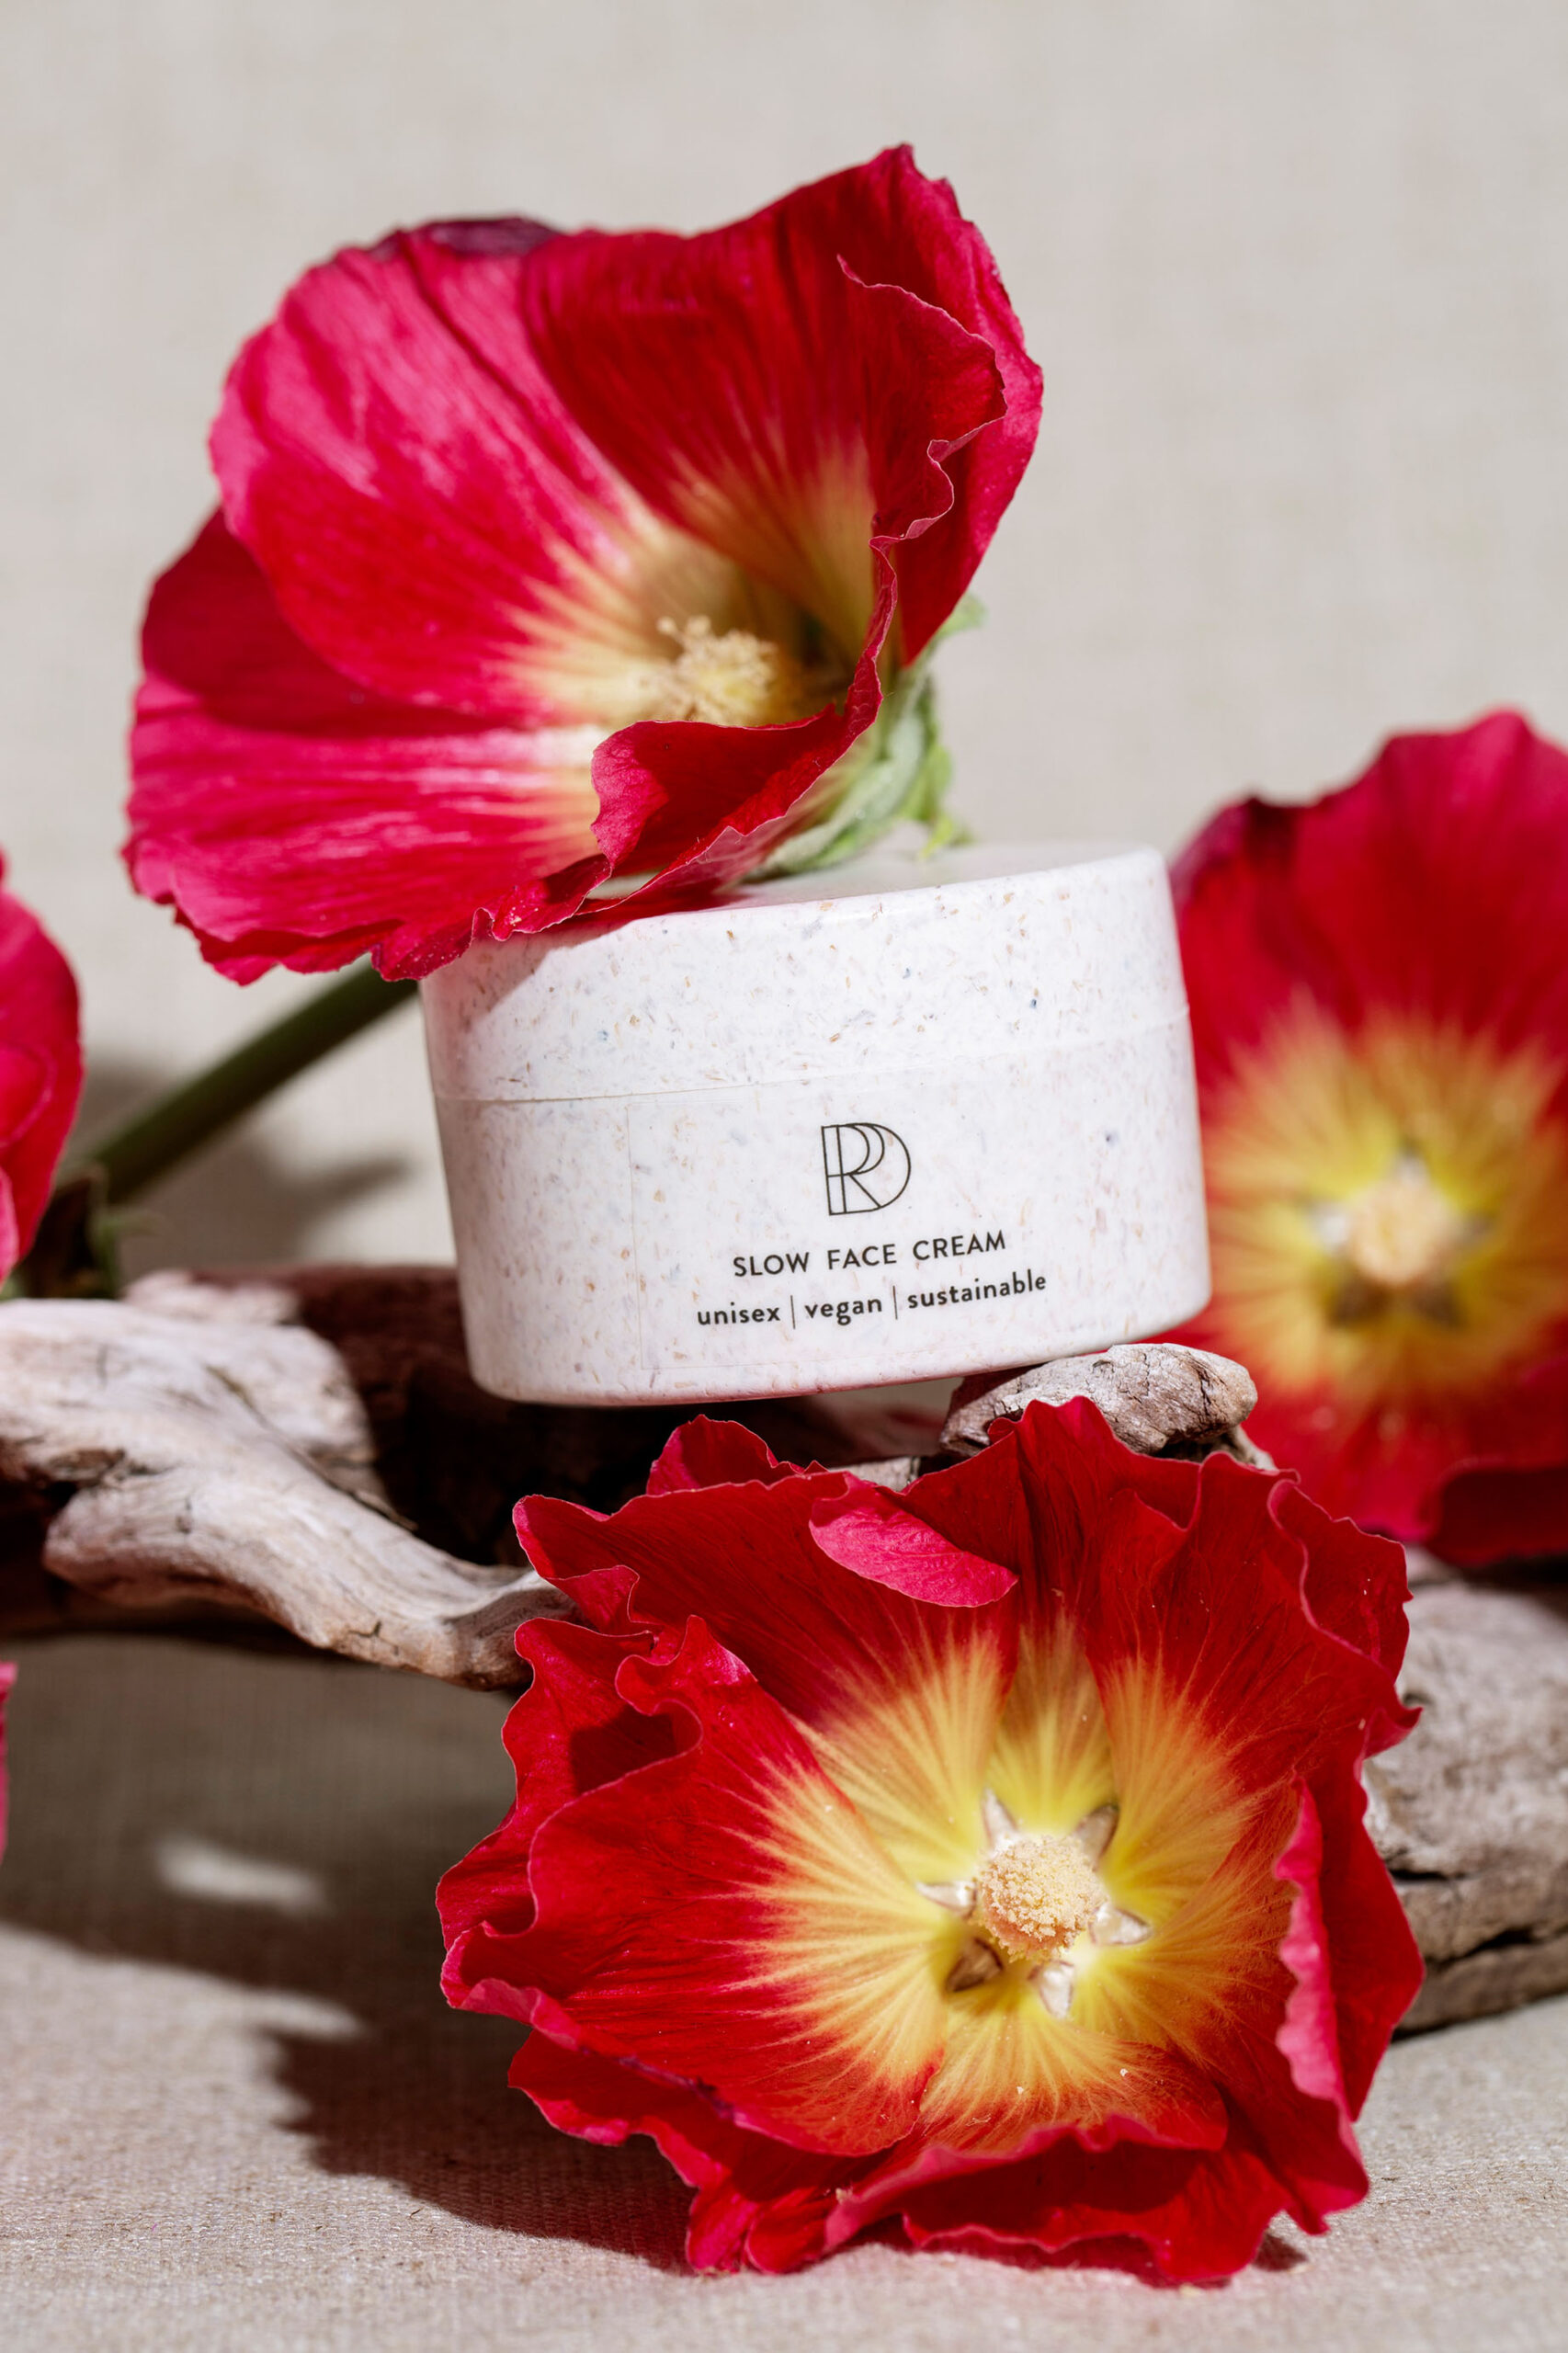 RDP Slow Face Cream. Packaging made with beautiful, functional and sustainable Sulapac material.